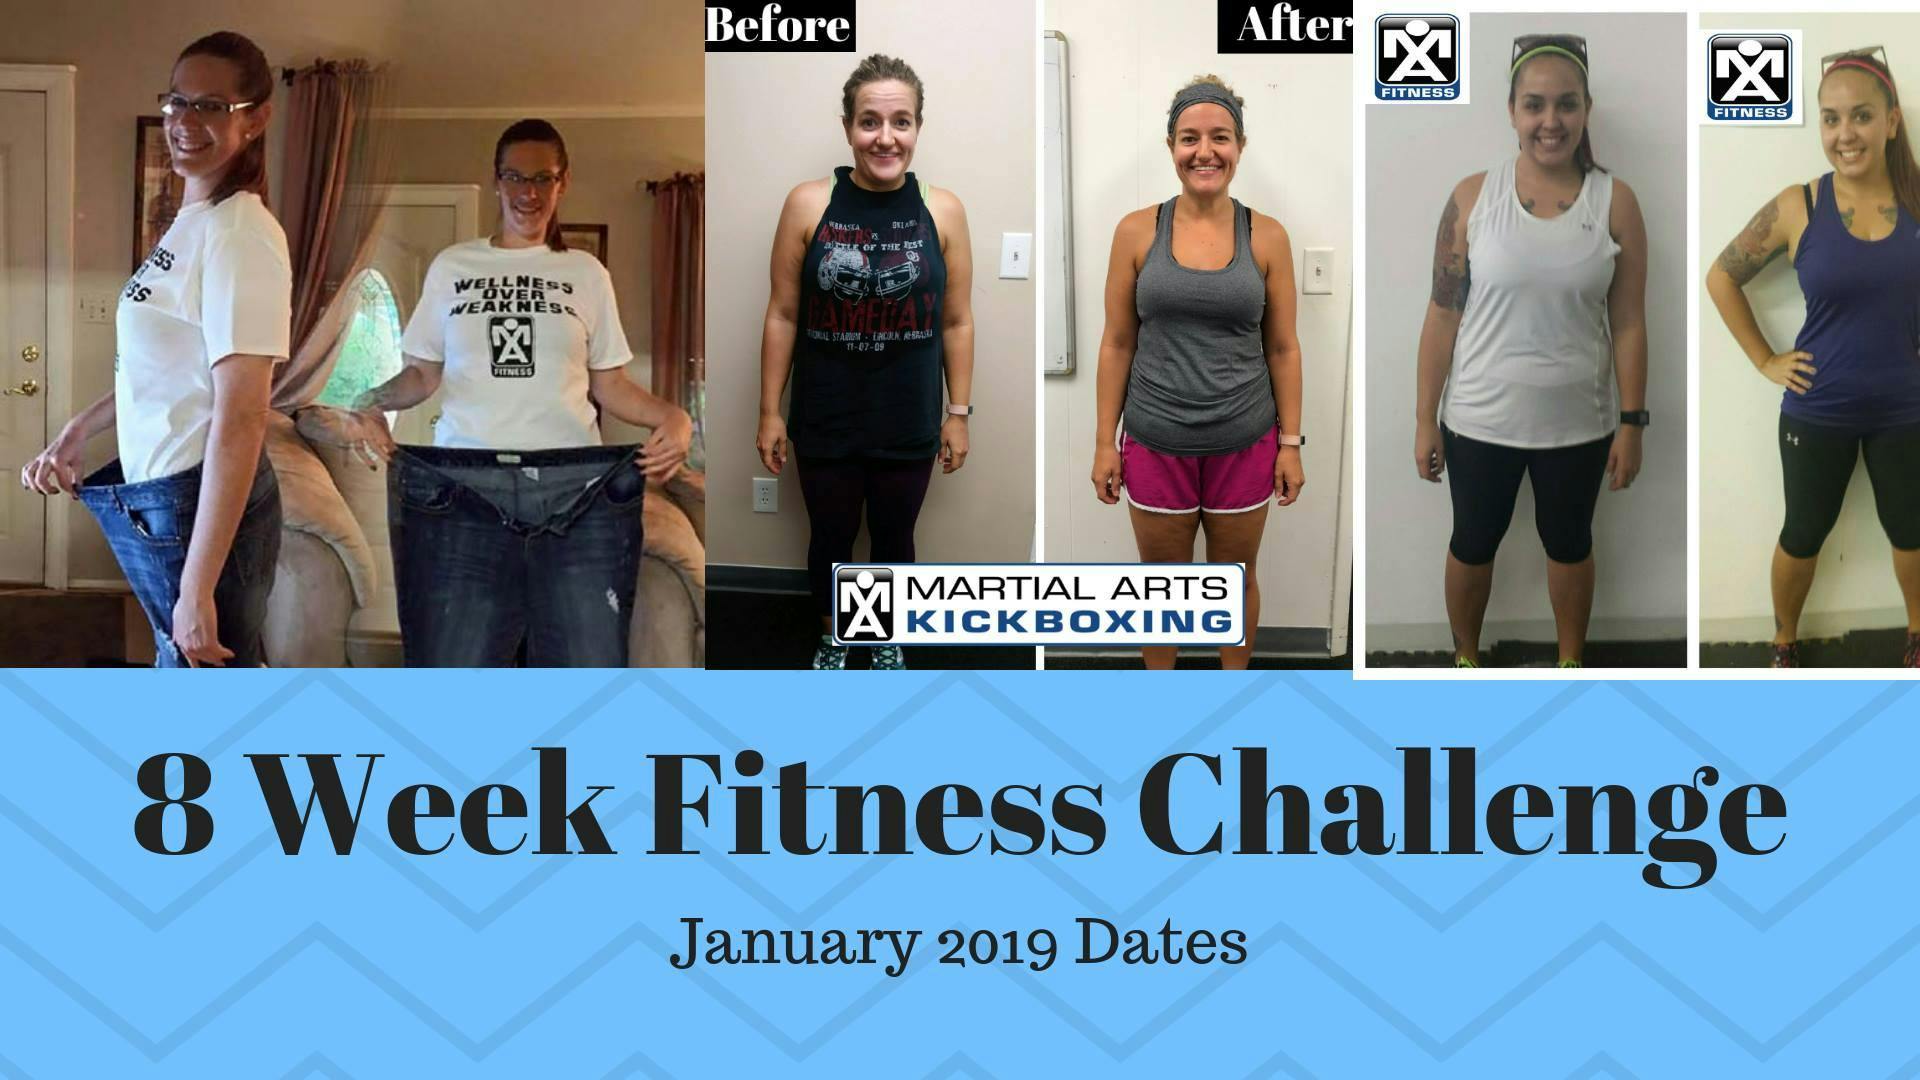 8 Week Fitness Challenge 5 Jan 2019 Images, Photos, Reviews